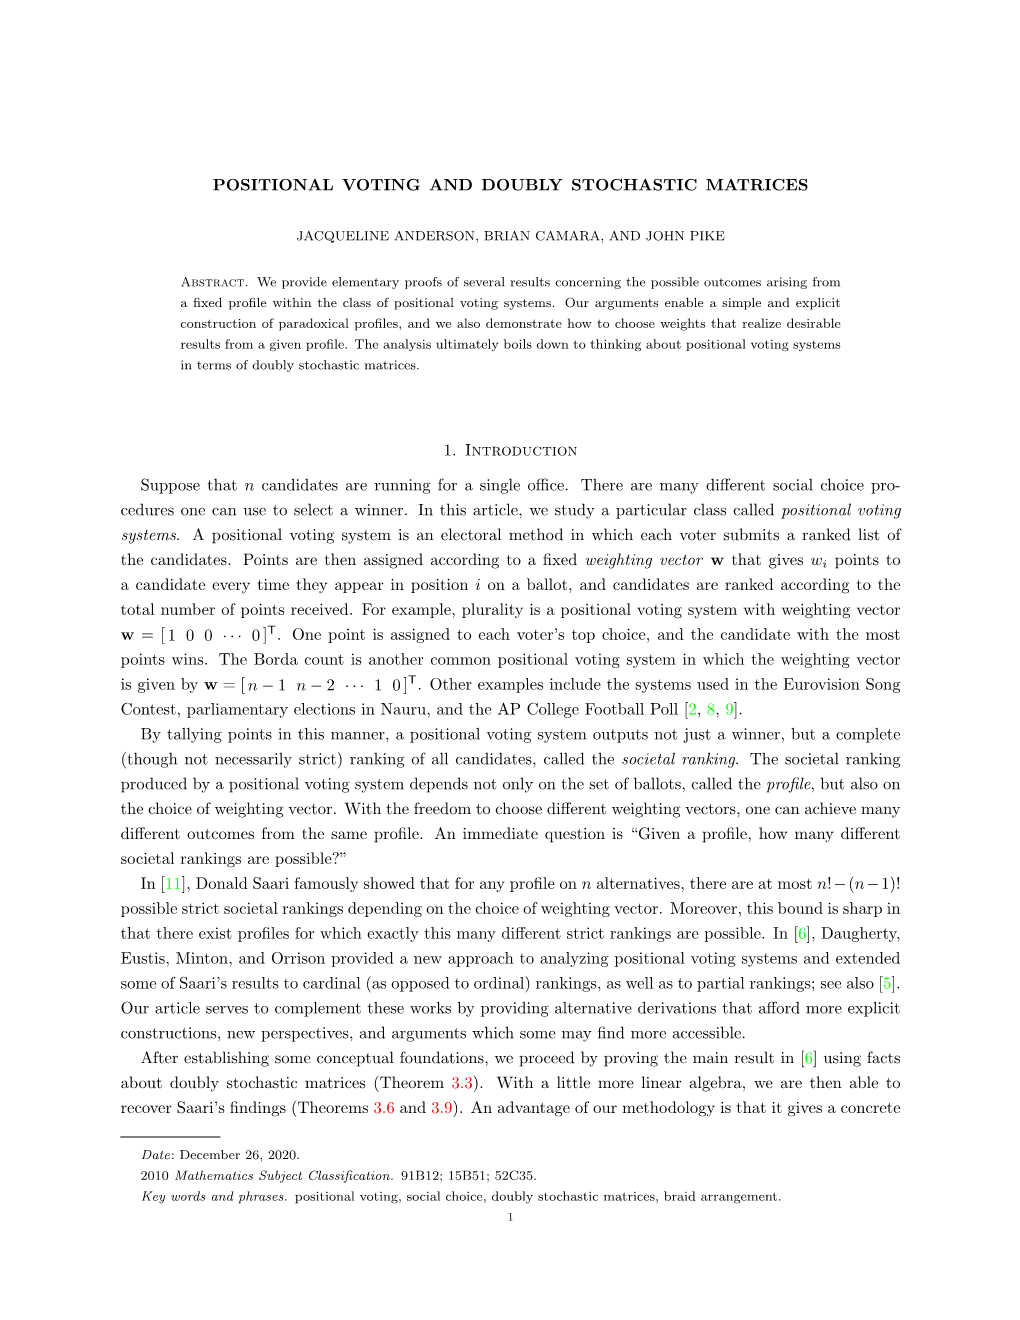 Positional Voting and Doubly Stochastic Matrices 10